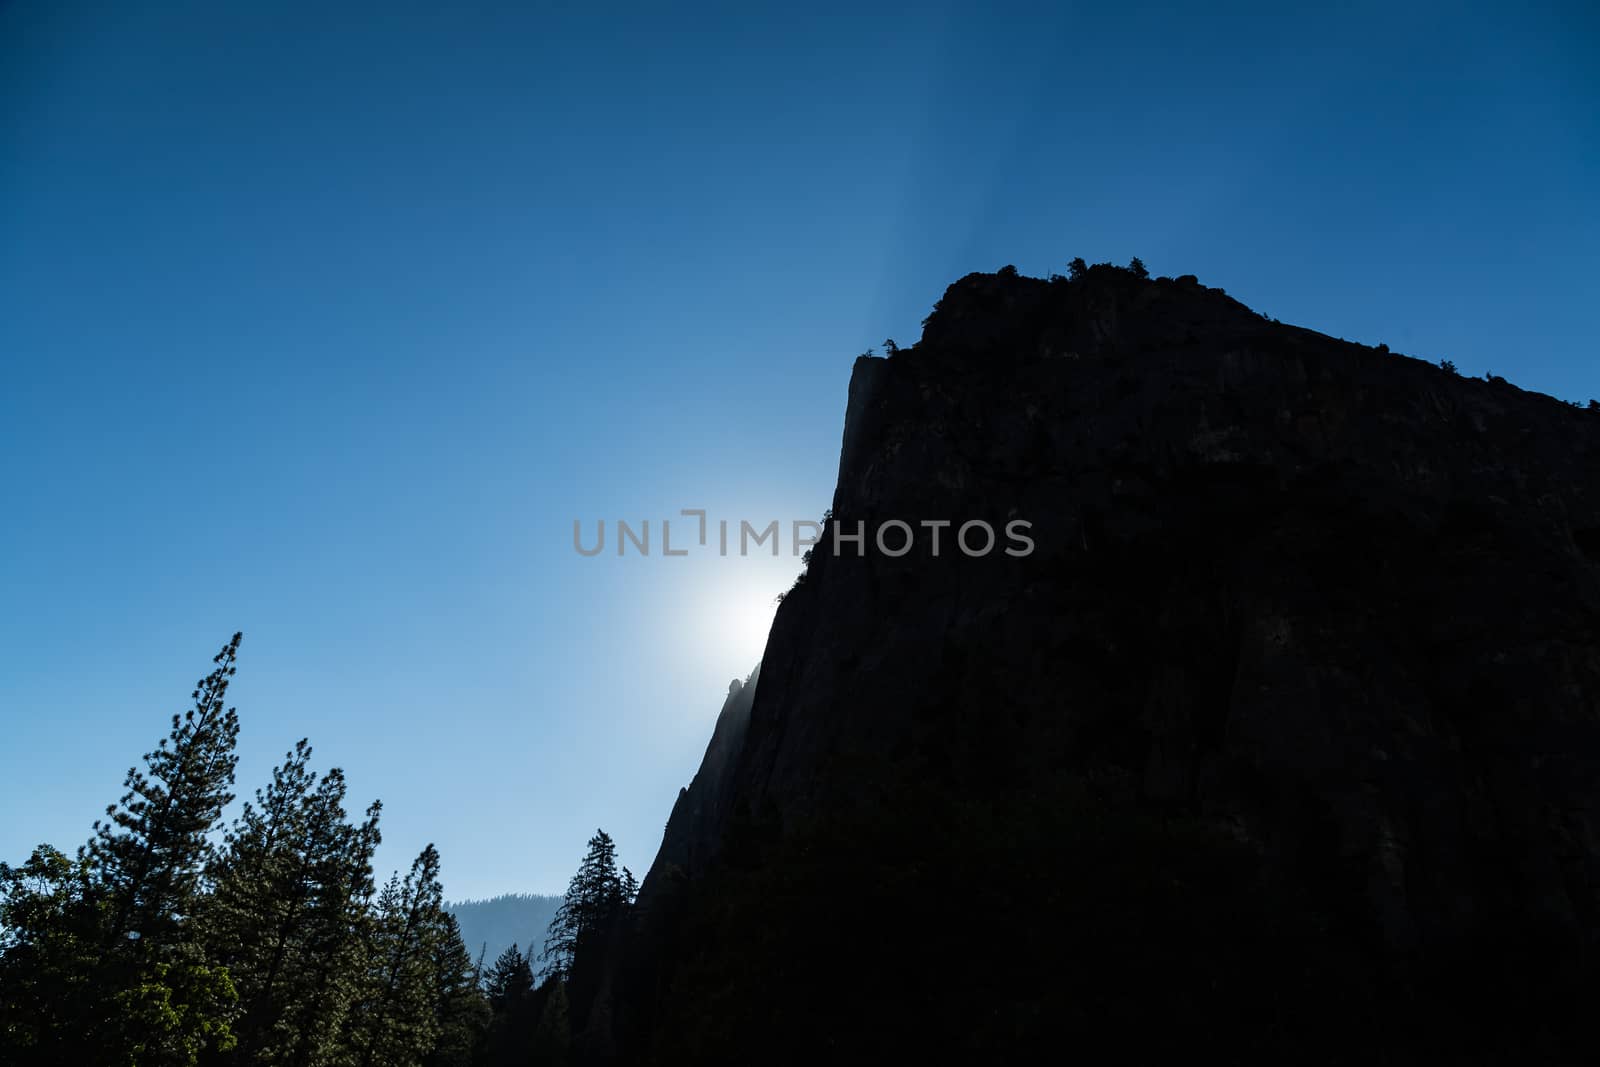 The Middle Cathedral Rock is a prominent rock face on the south side of Yosemite Valley, California.